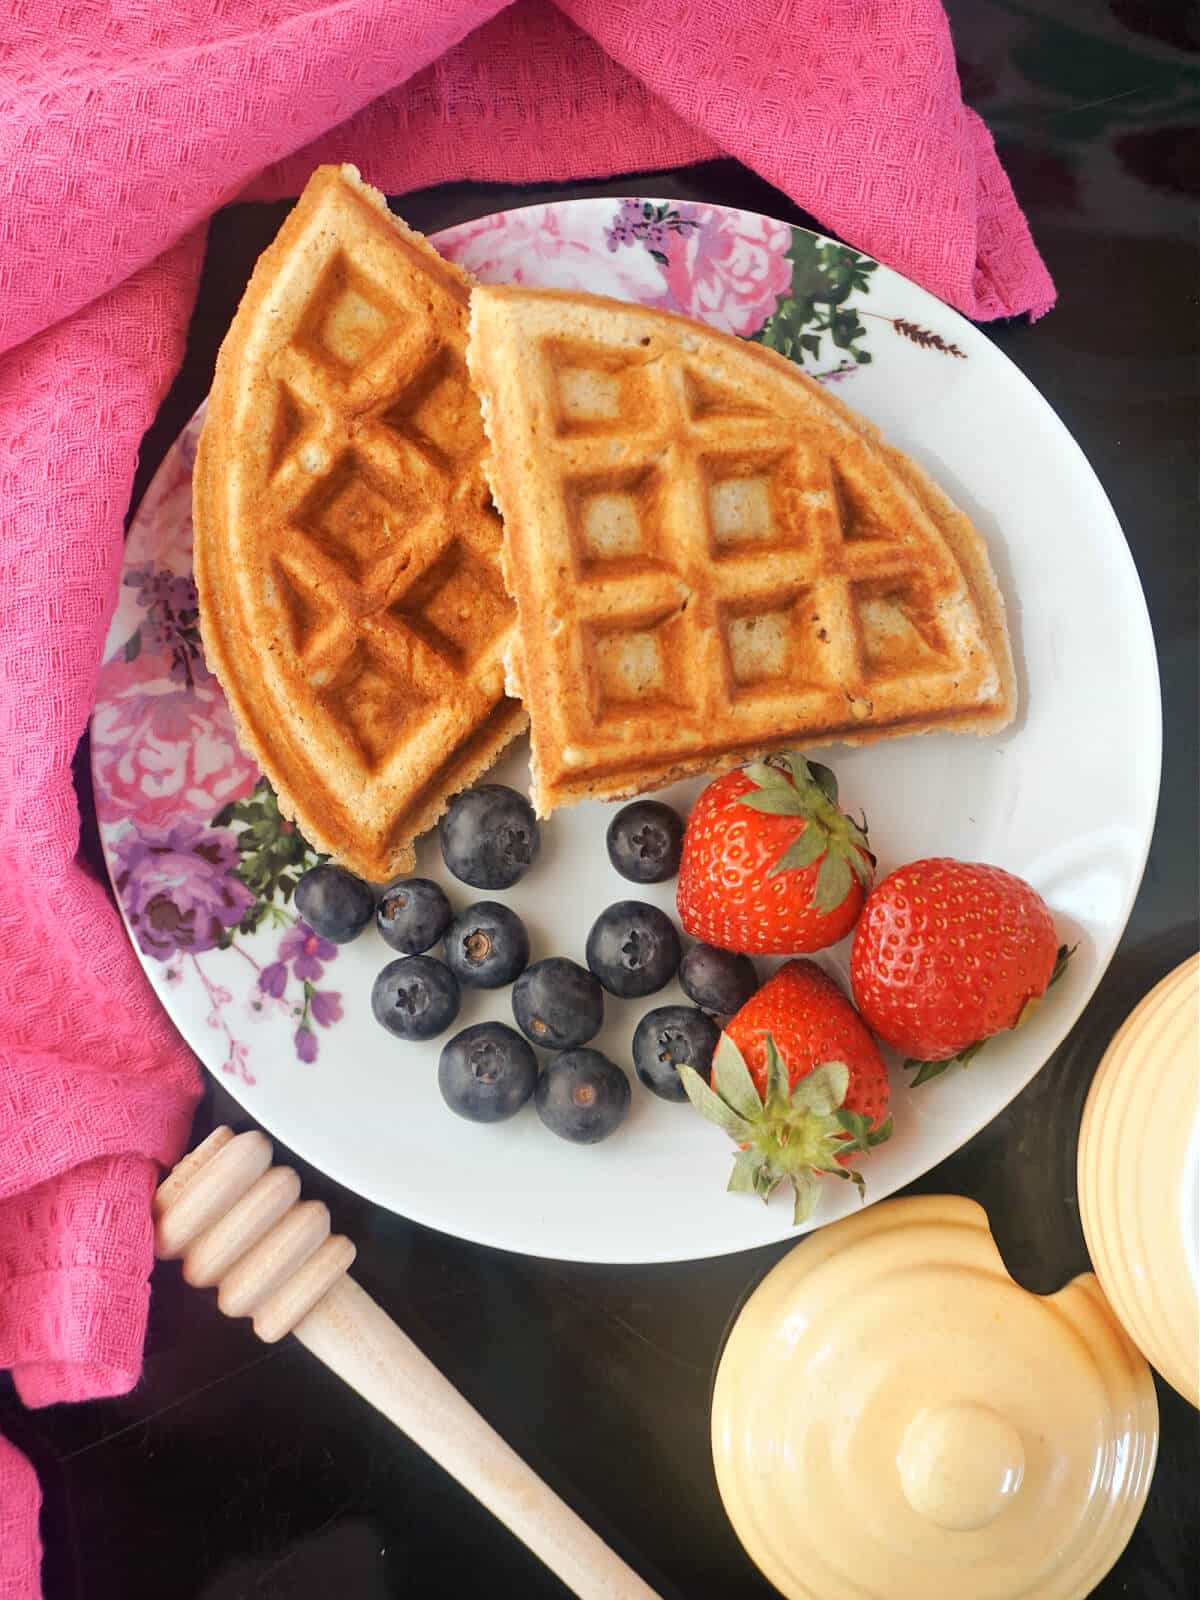 Overhead shoot of a plate with 2 waffles, blueberries and 3 strawberries.